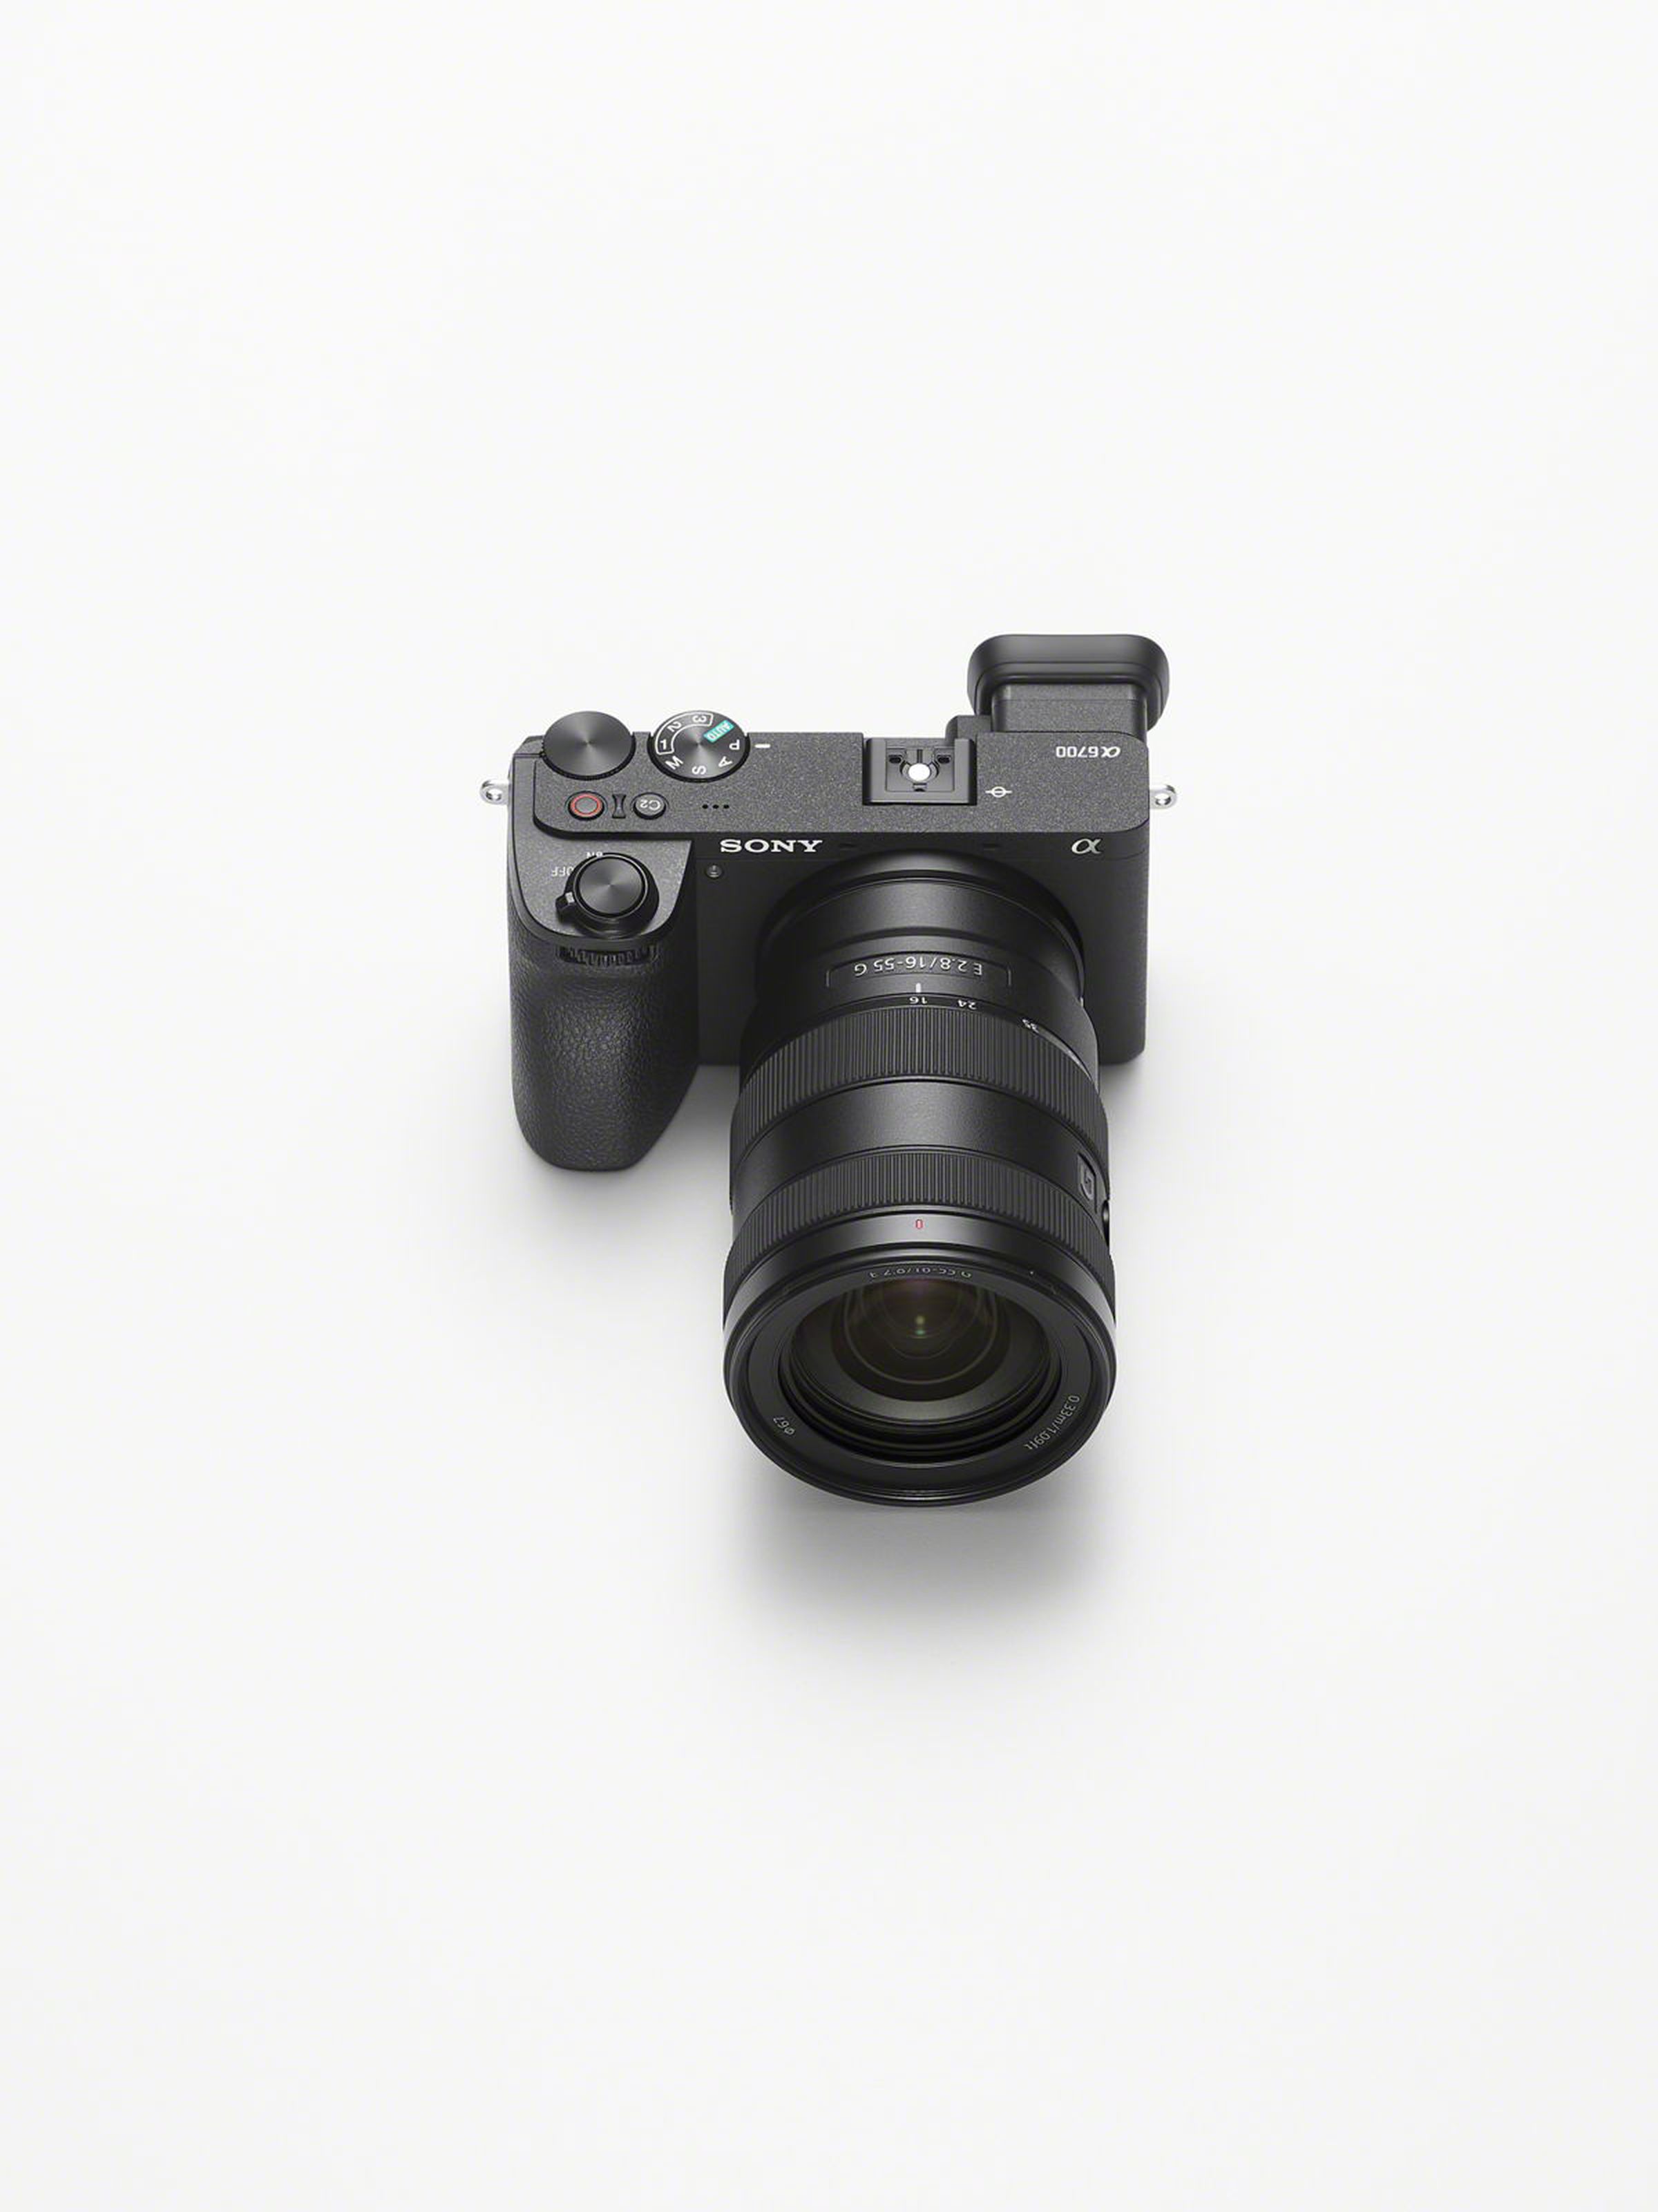 Top-down view showing the Sony A6700 with a telephoto lens